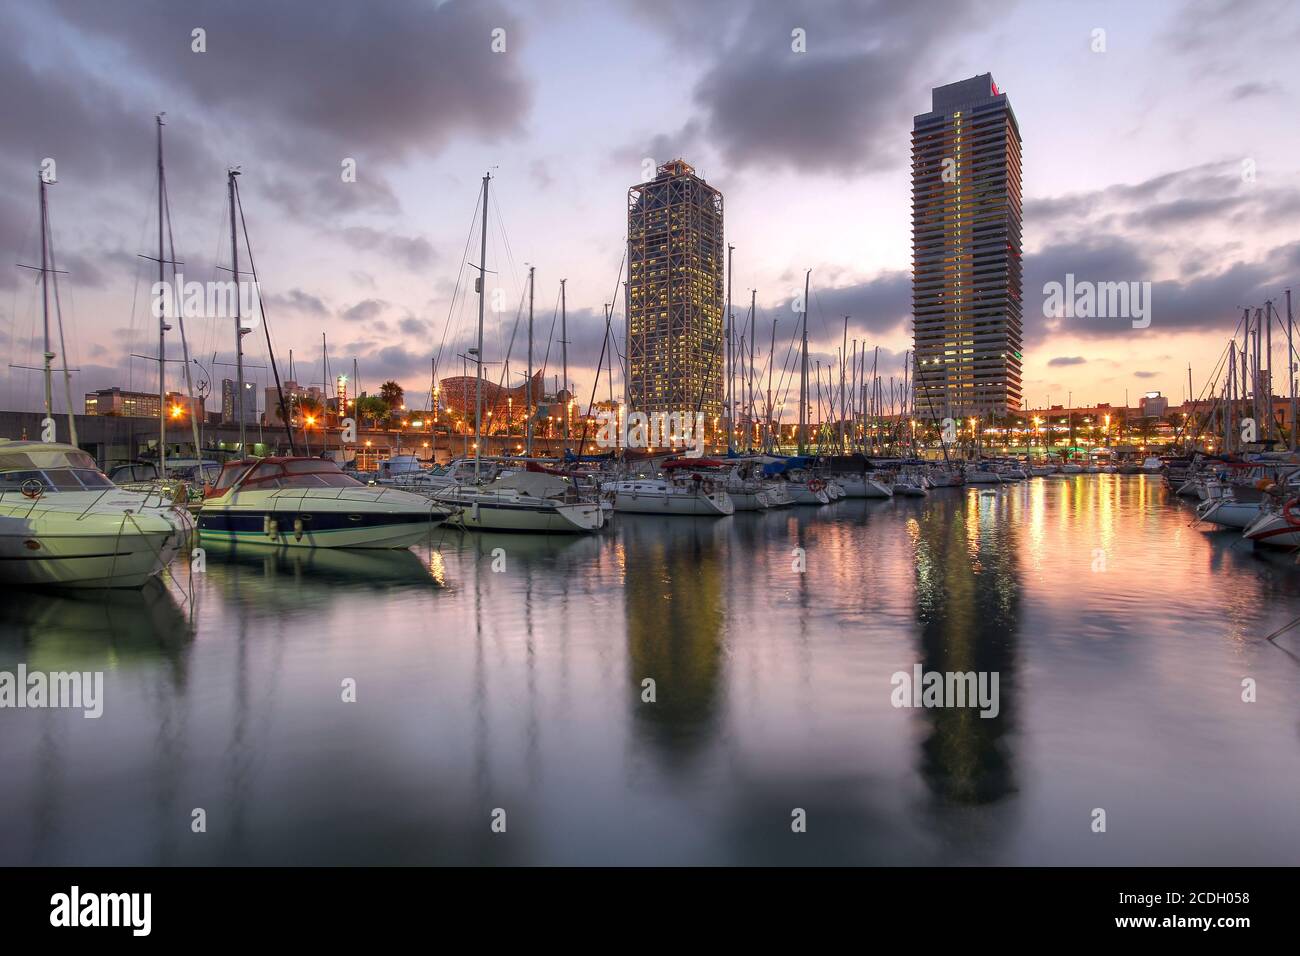 Twin skyscrapers towering over the marina in Port Olimpic (Olympic Harbor), Barcelona, Spain at sunset. Stock Photo